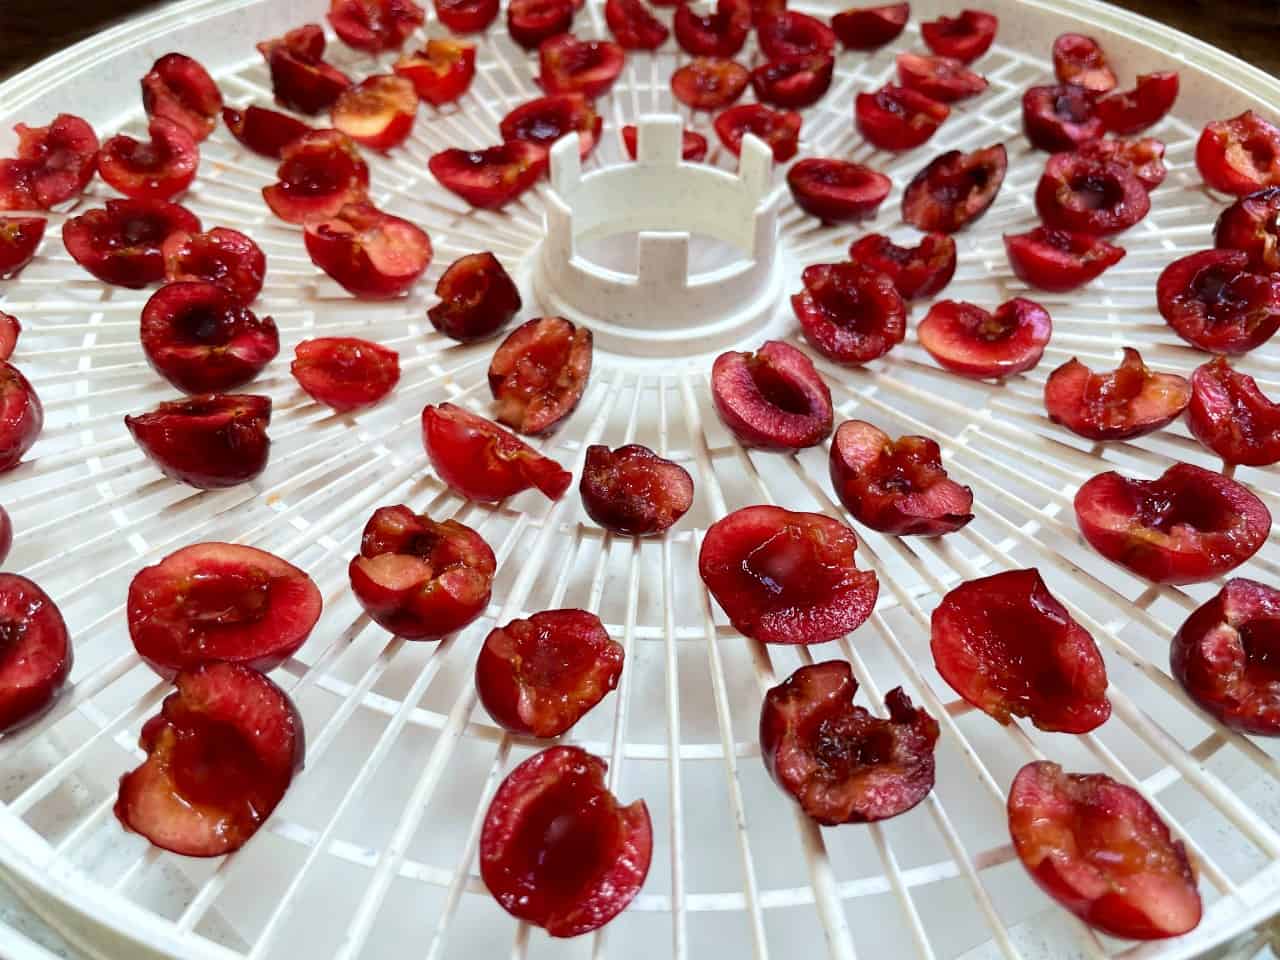 How To Dry Cherries In A Dehydrator